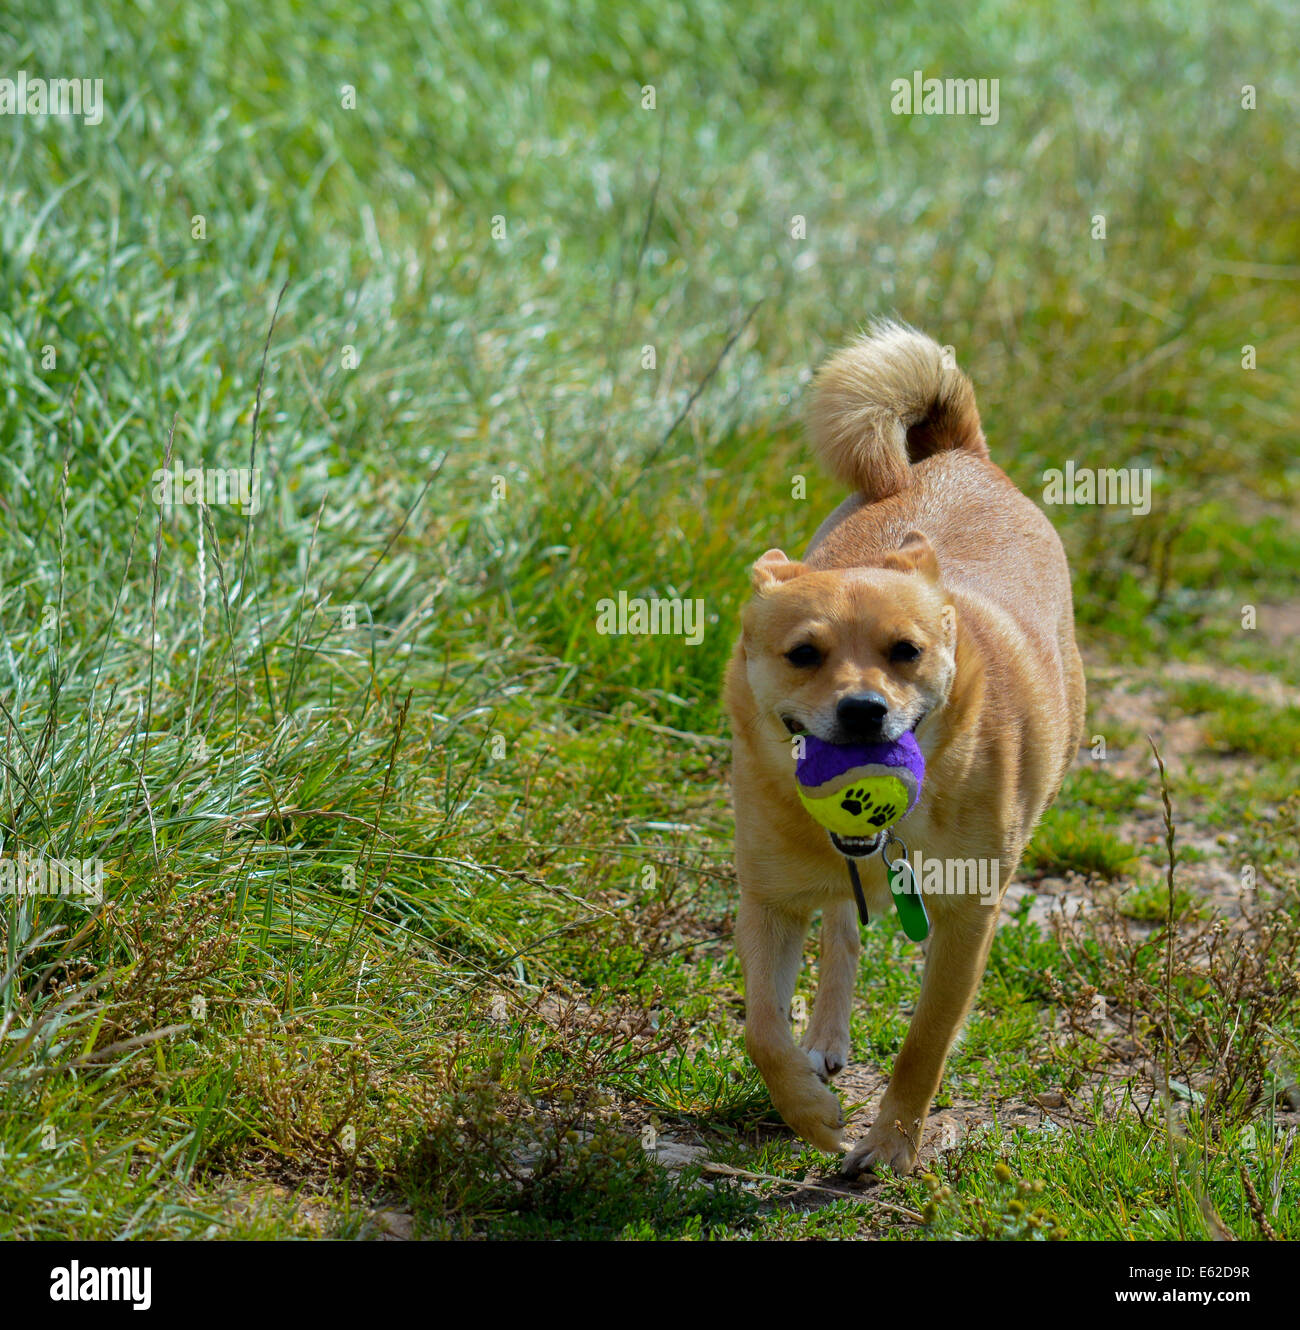 Small dog with ball Stock Photo